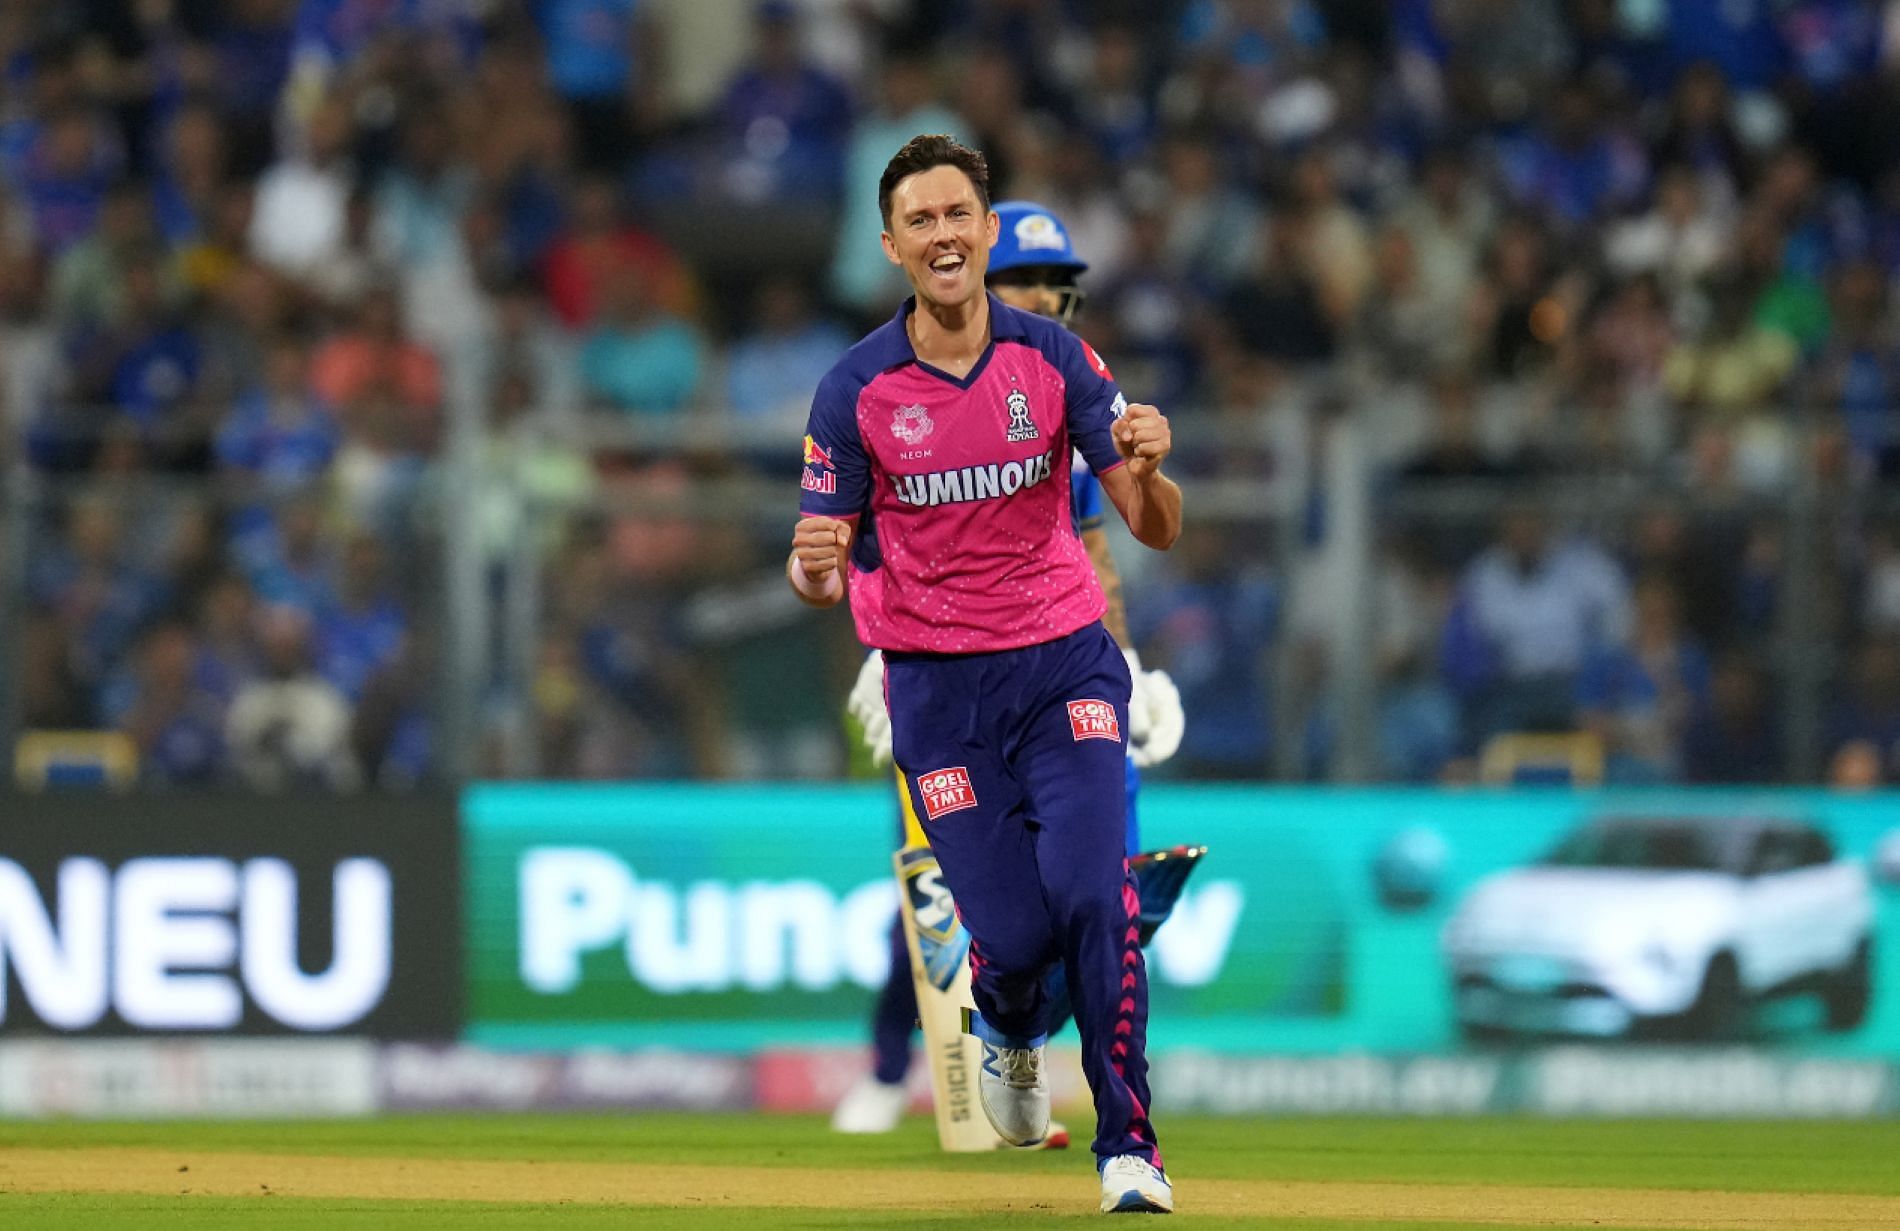 Boult wrecked his former franchise in the very first over [Credits: IPL Twitter handle]